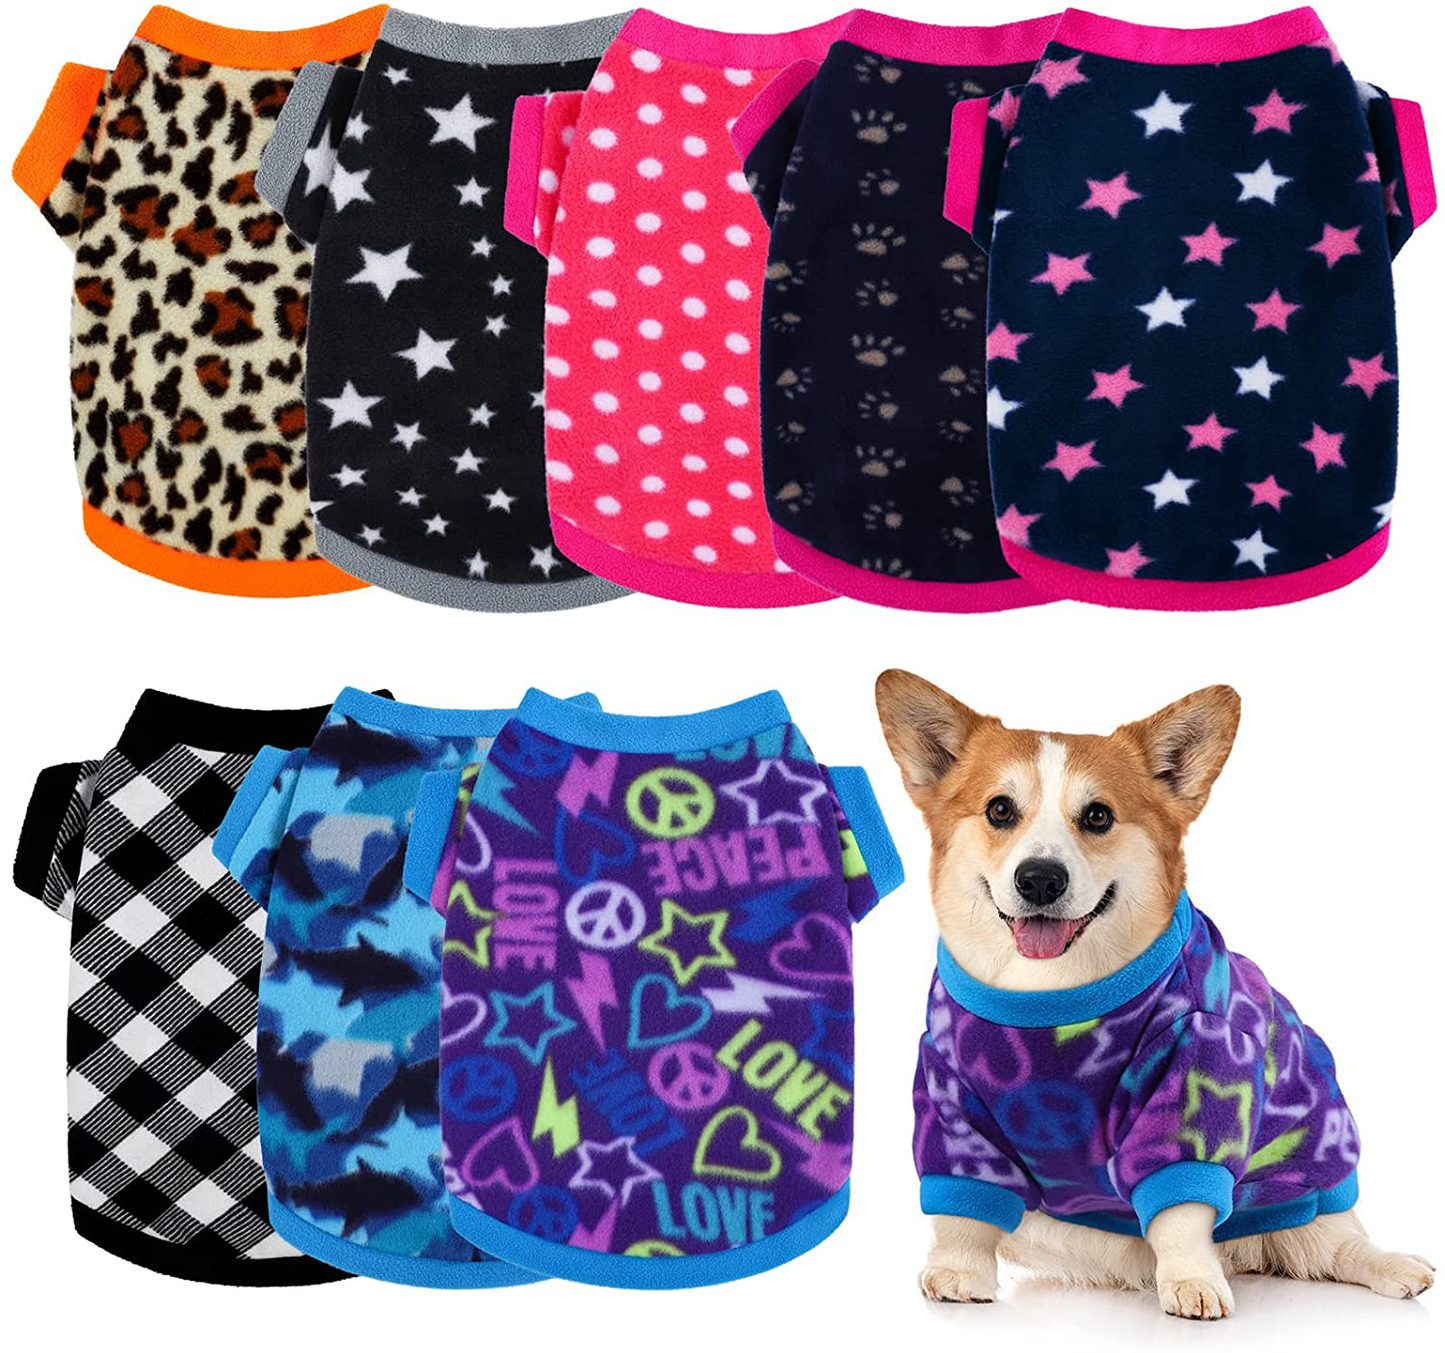 Pedgot Set of 8 Dog Sweater Puppy Clothes Soft Dog Outfits Winter Pet Fleece Sweater Warm Pet Shirt with Lovely Design for Dogs and Cats